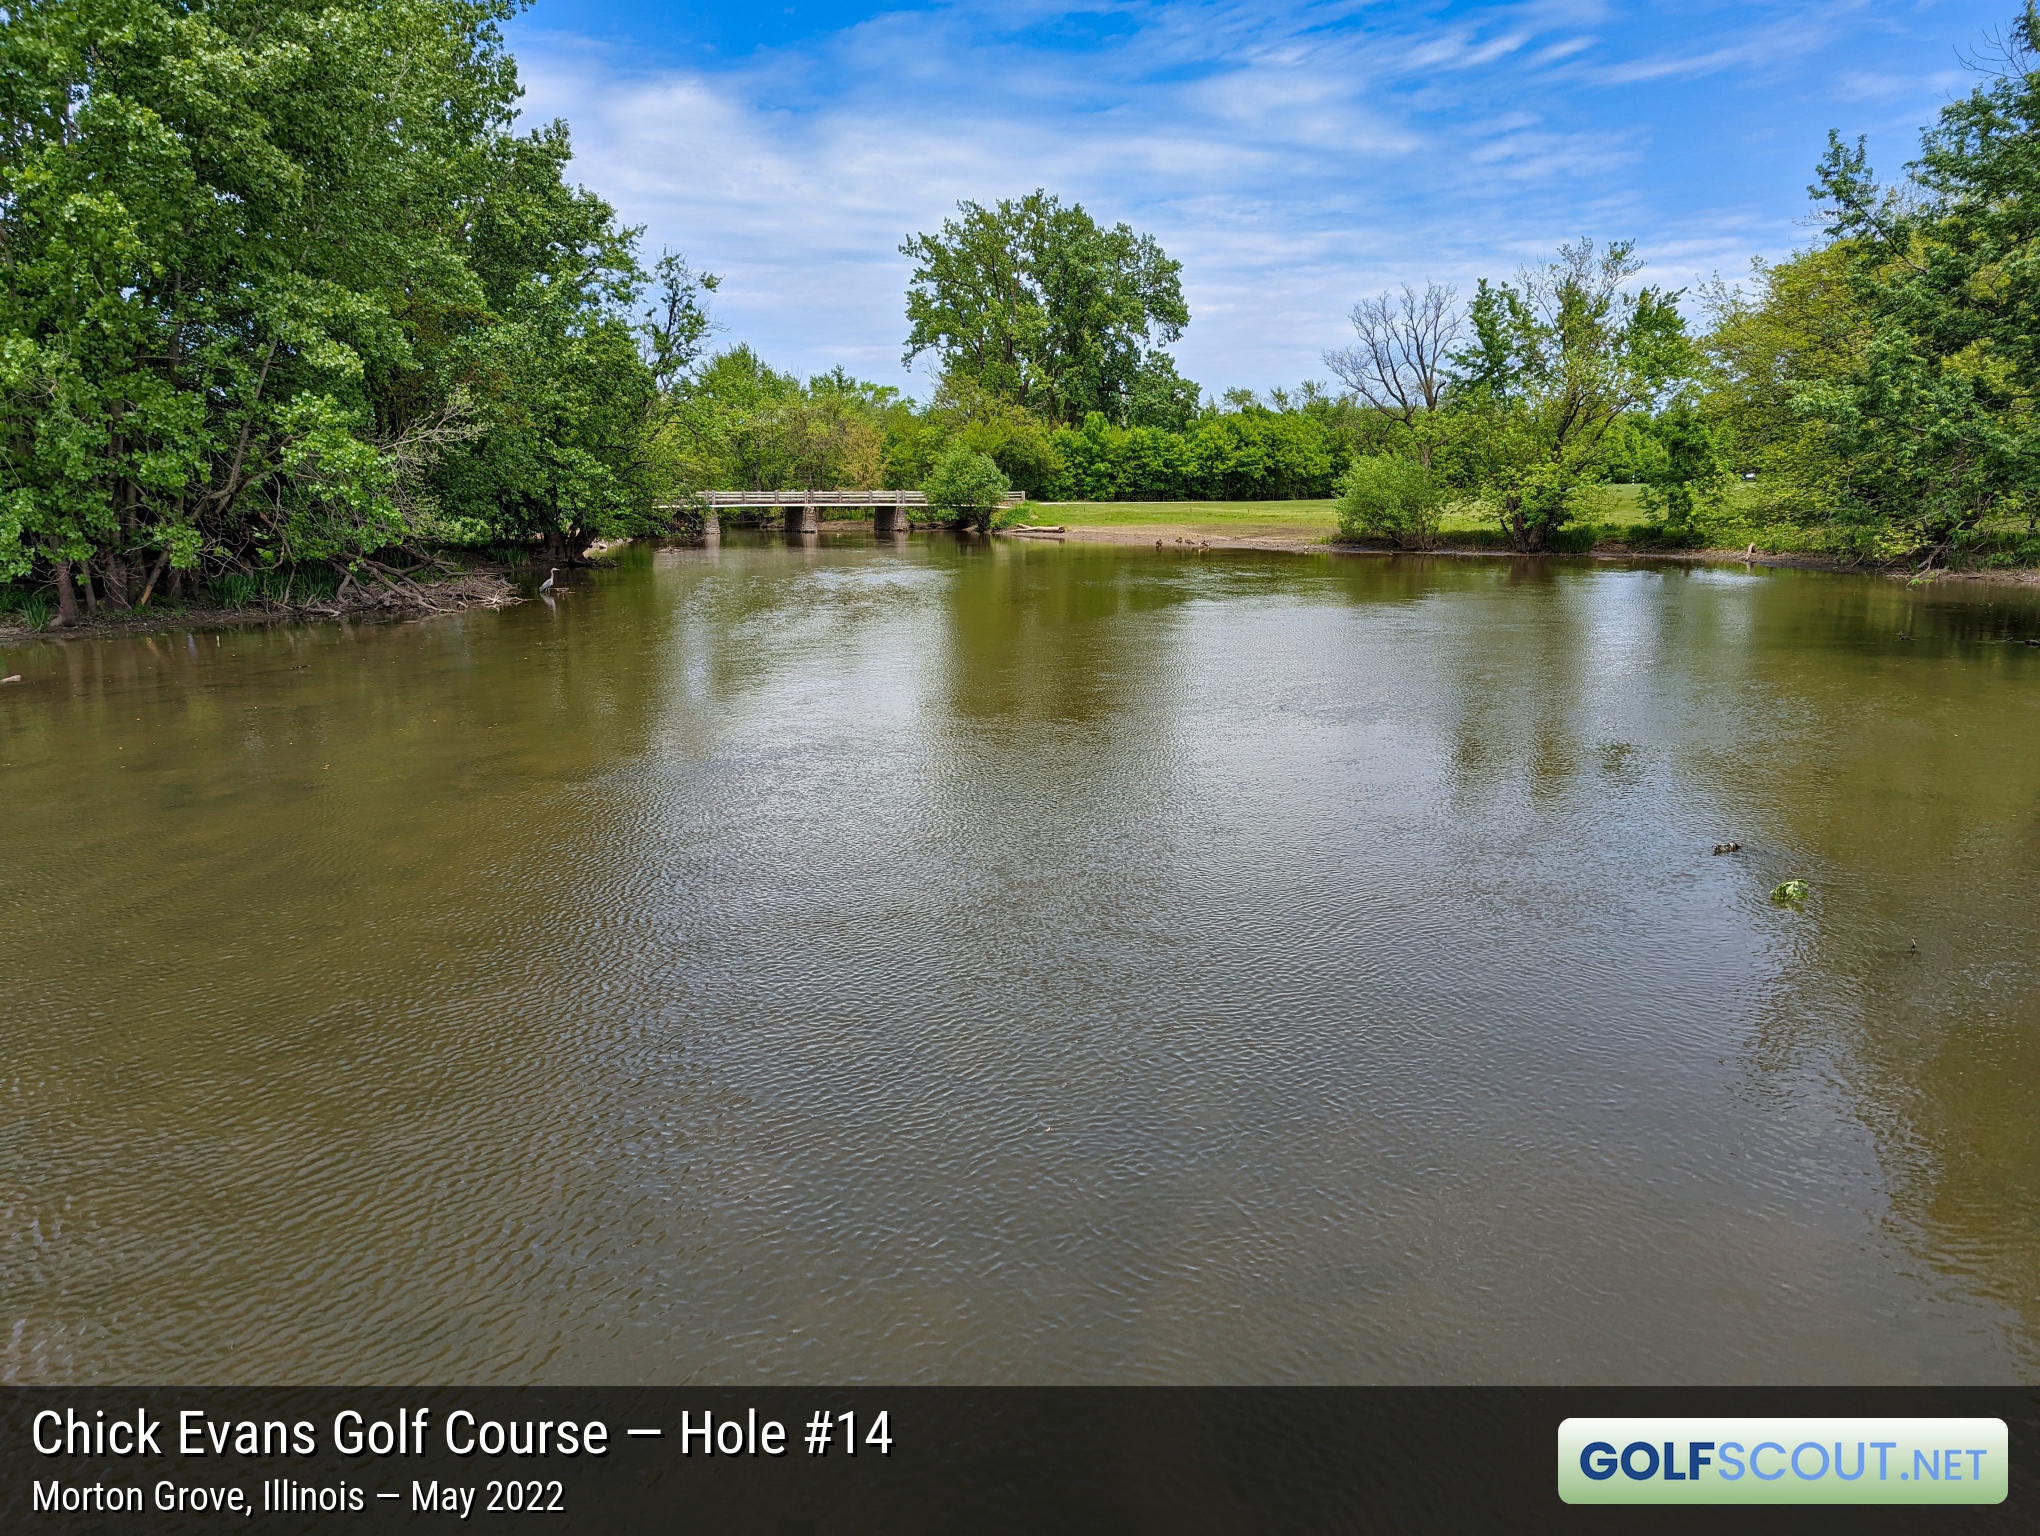 Photo of hole #14 at Chick Evans Golf Course in Morton Grove, Illinois. 